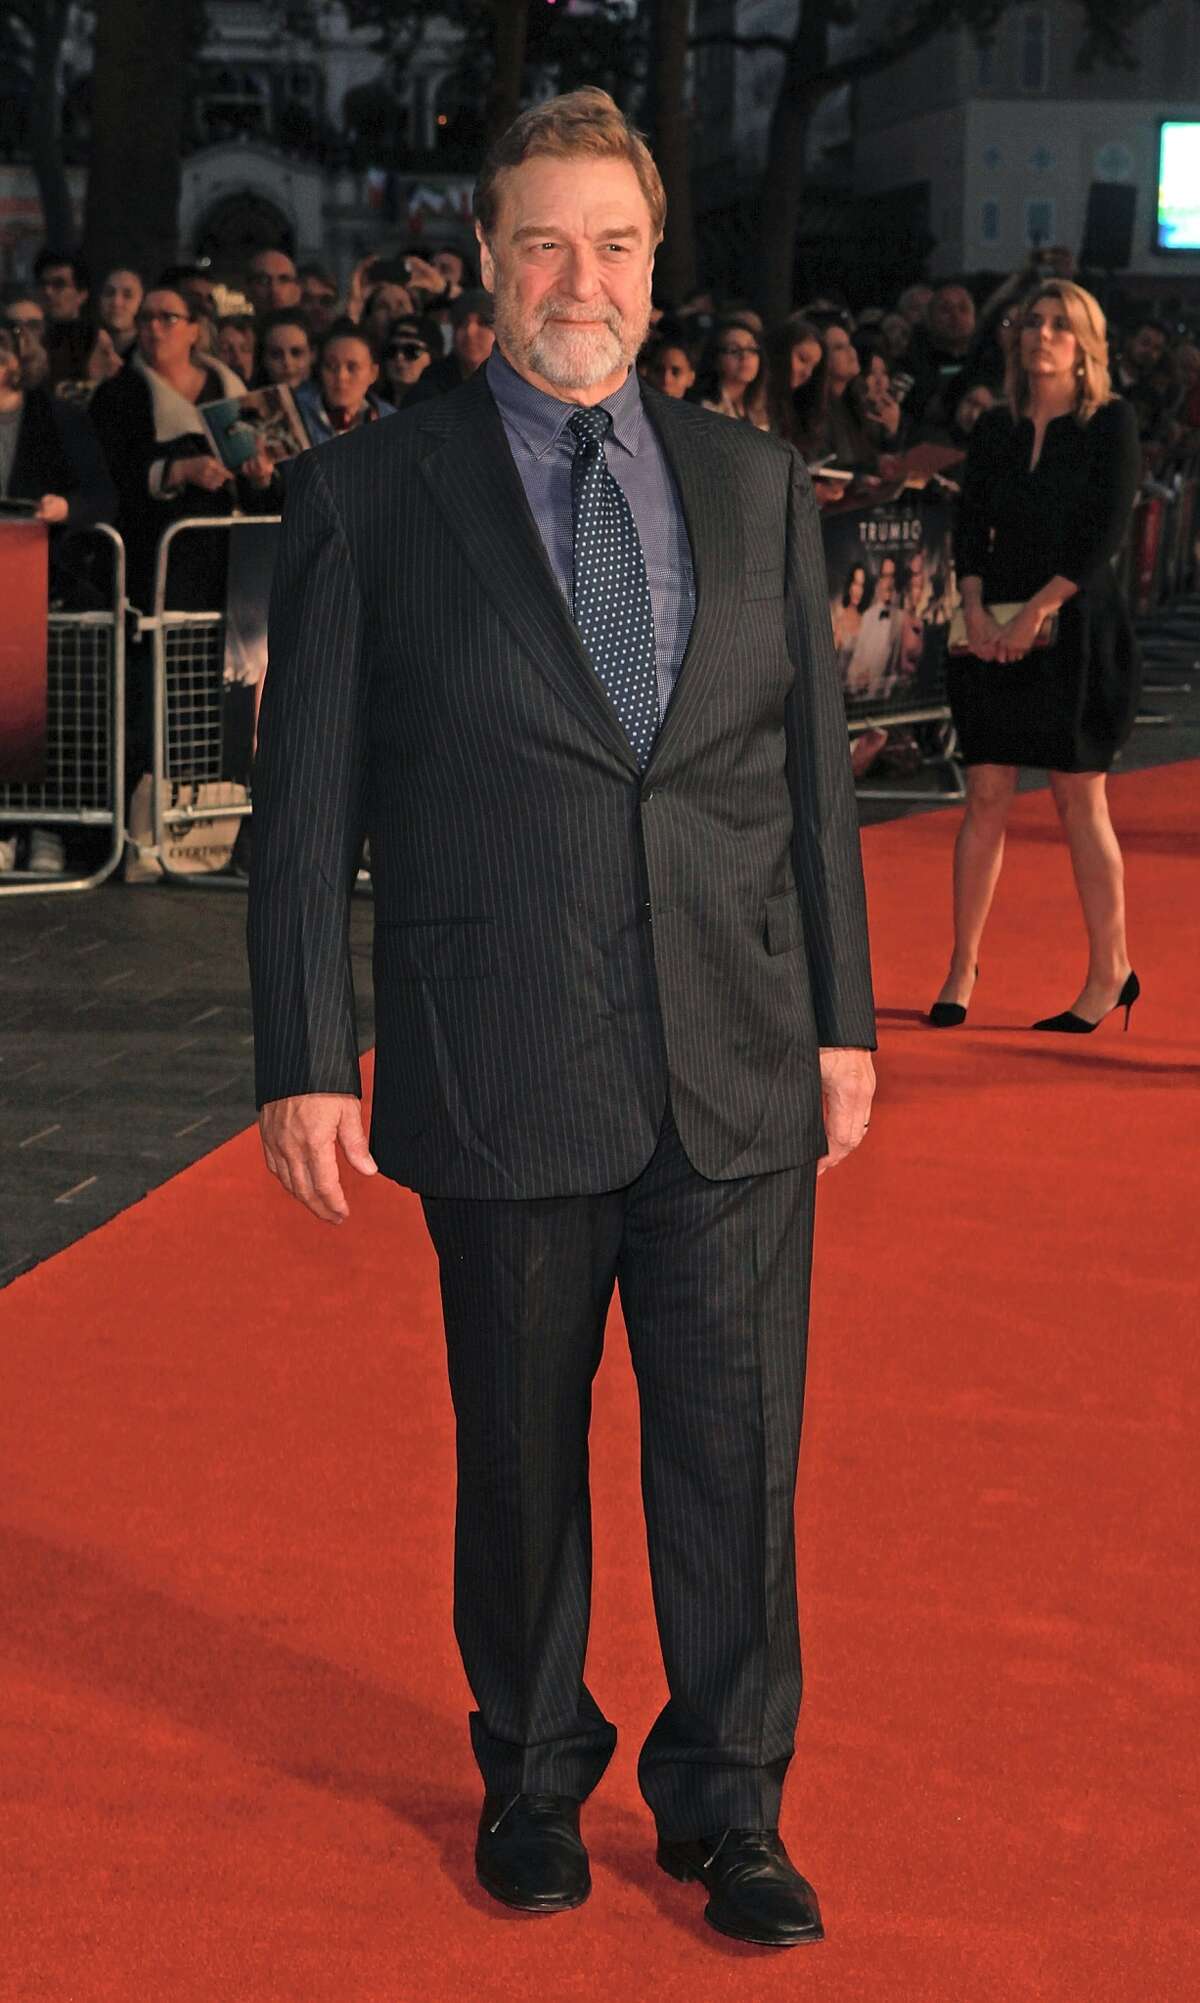 John Goodman attends the Accenture Gala Screening of 'Trumbo' during the BFI London Film Festival at Odeon Leicester Square on October 8, 2015 in London, England. (Photo by )